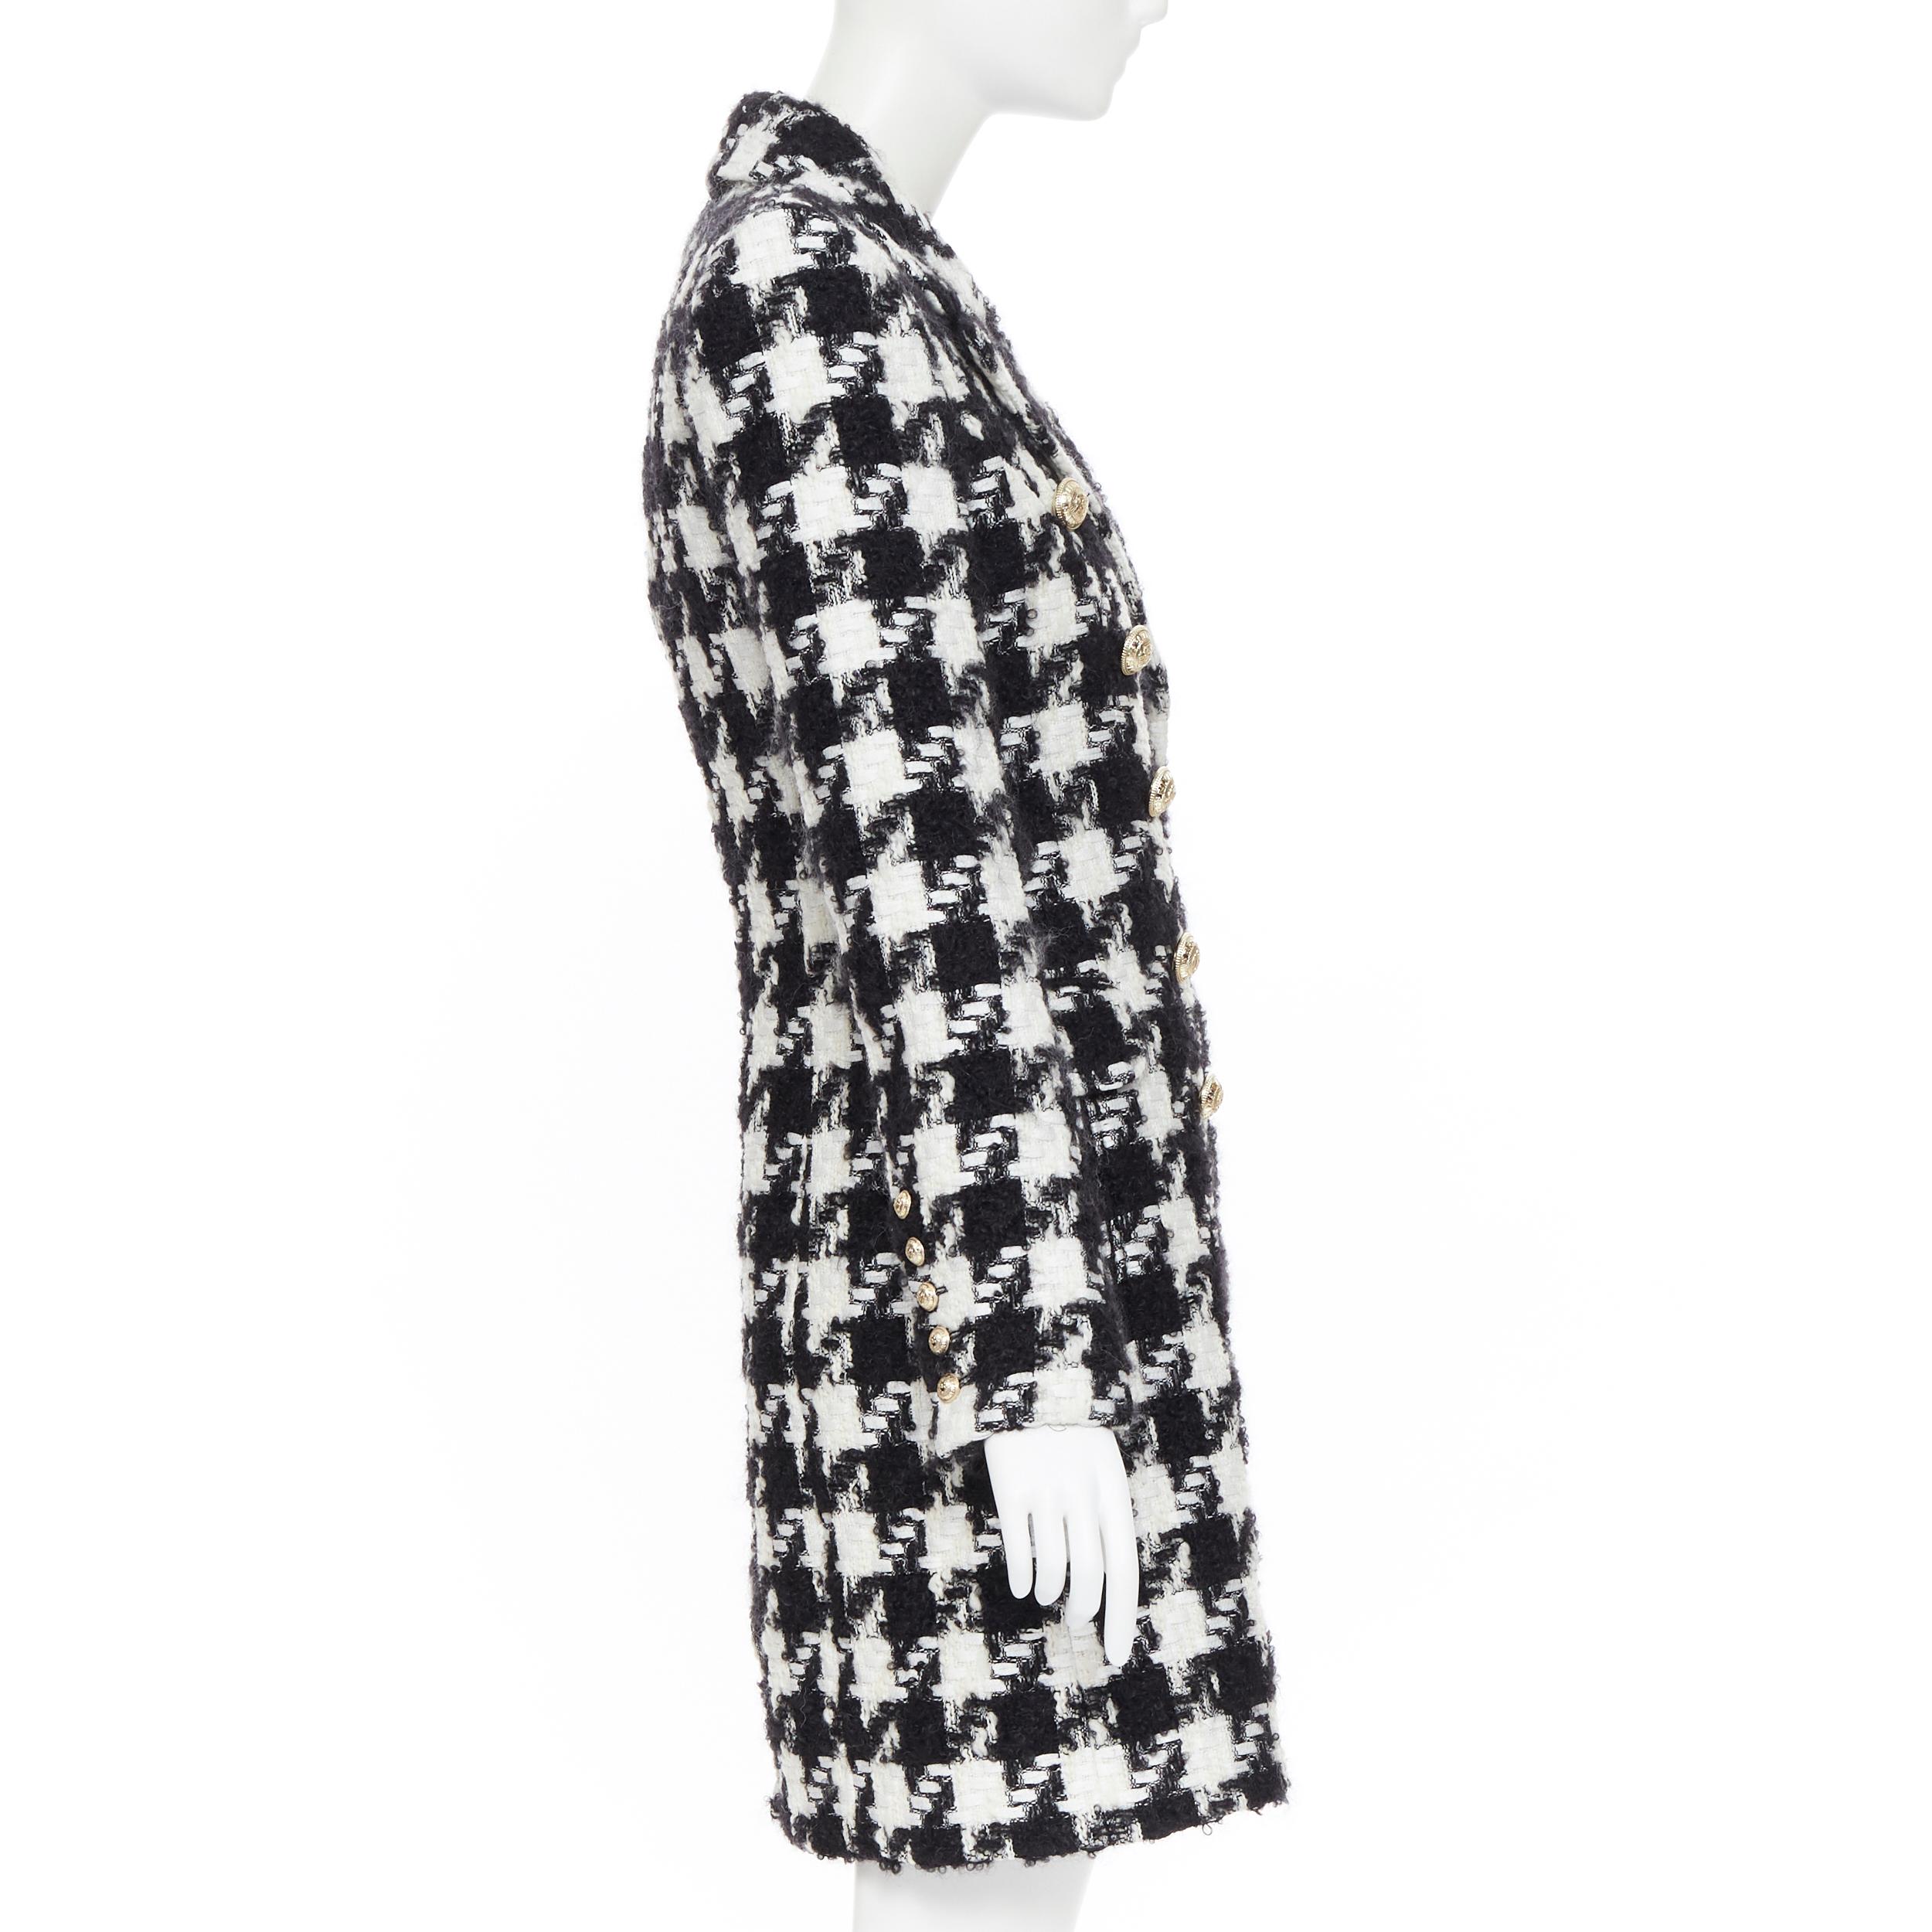 Black new BALMAIN houndstooth black white tweed double breasted military coat FR34 XS